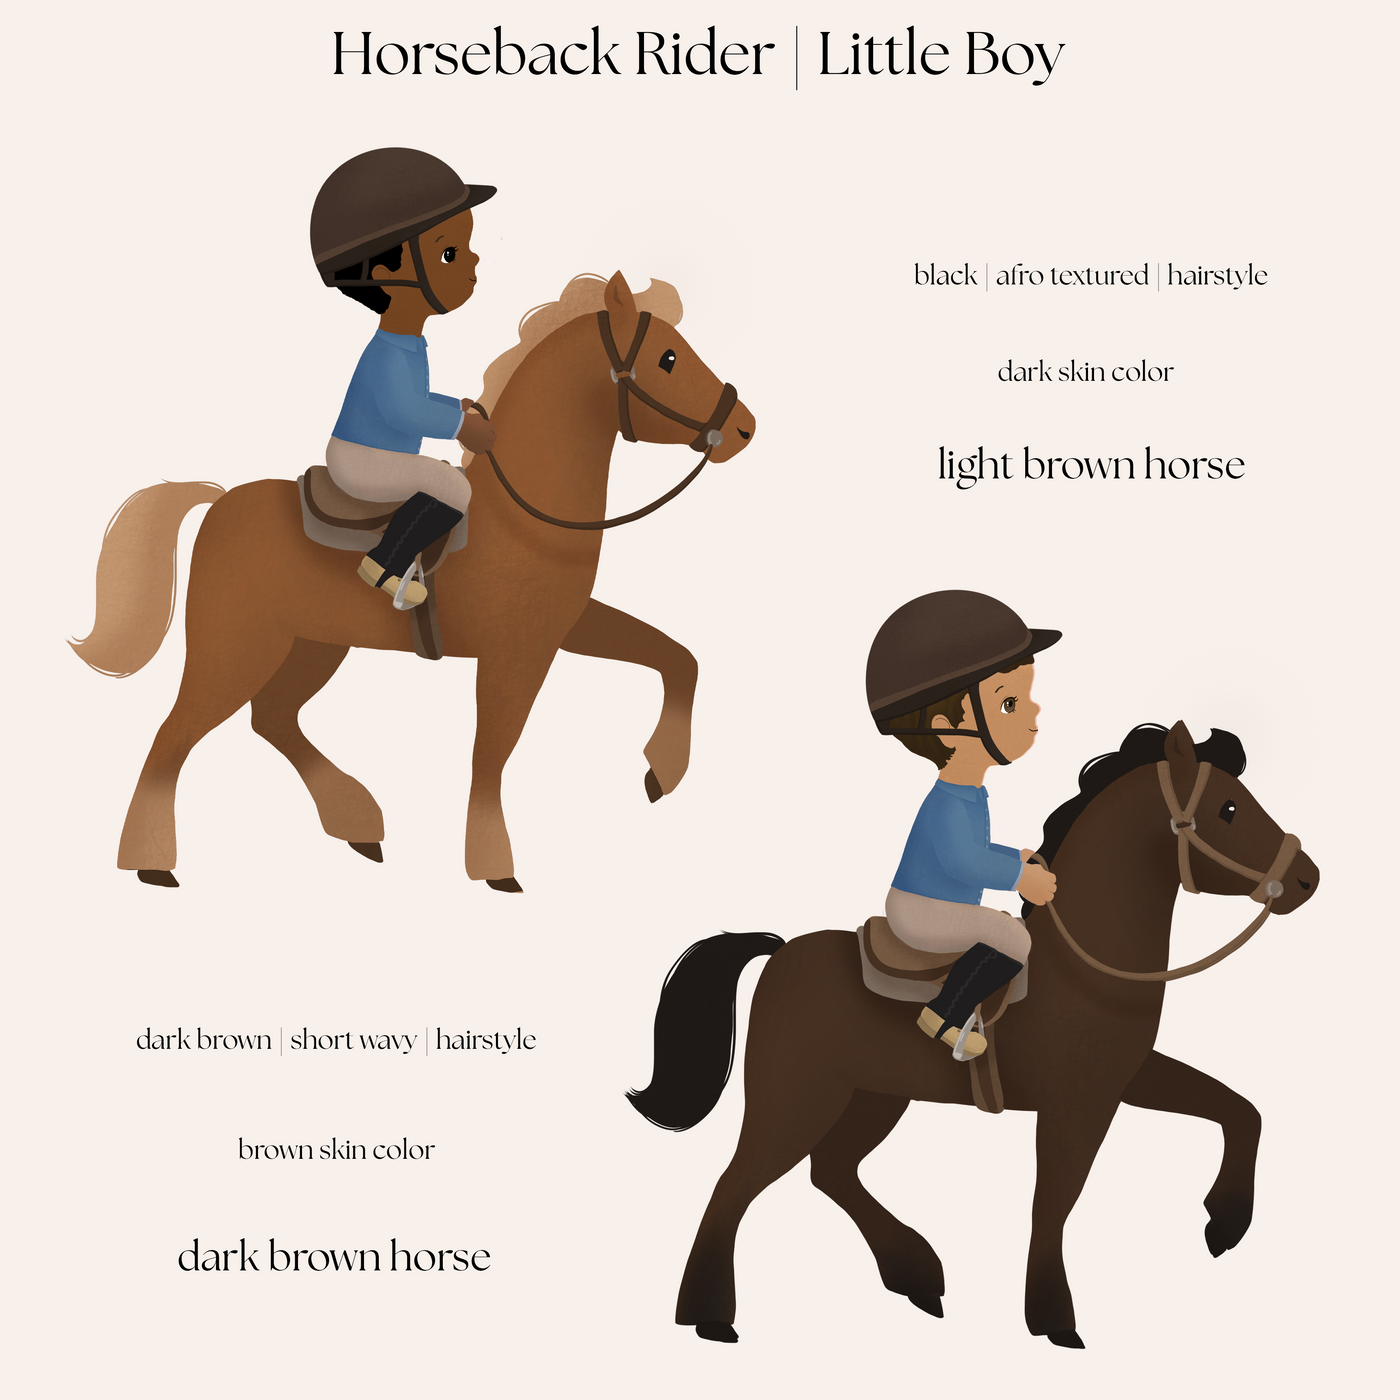 Little Horse Back Rider Boy Personalized Backpack - large